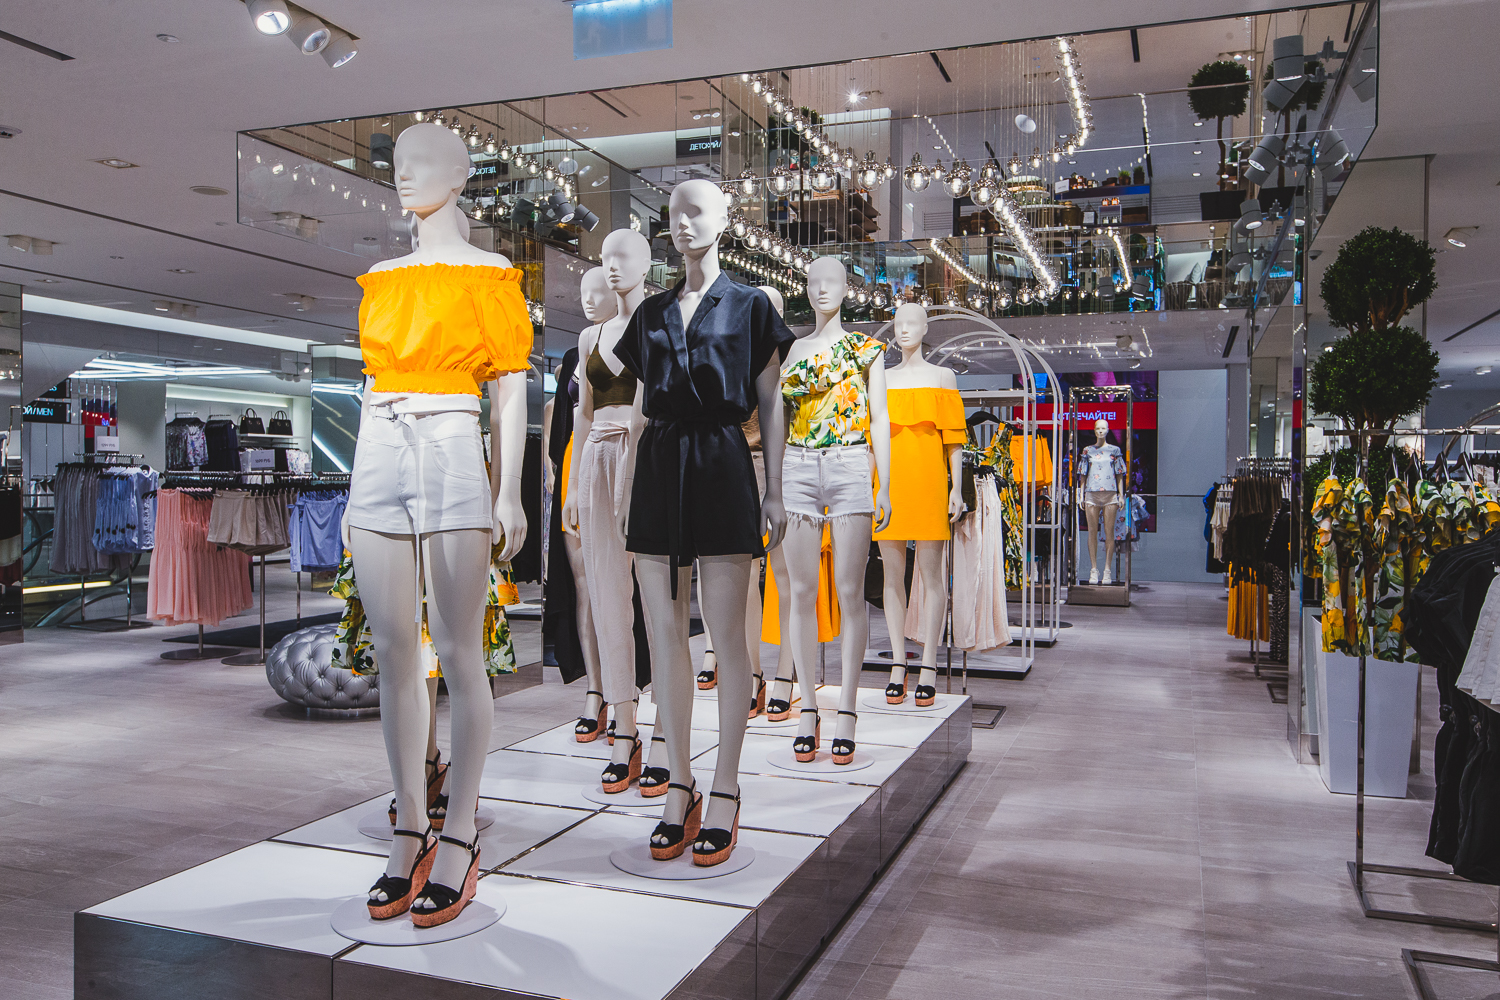 Fast-fashion retailers are introducing higher-margin brands into their assortments